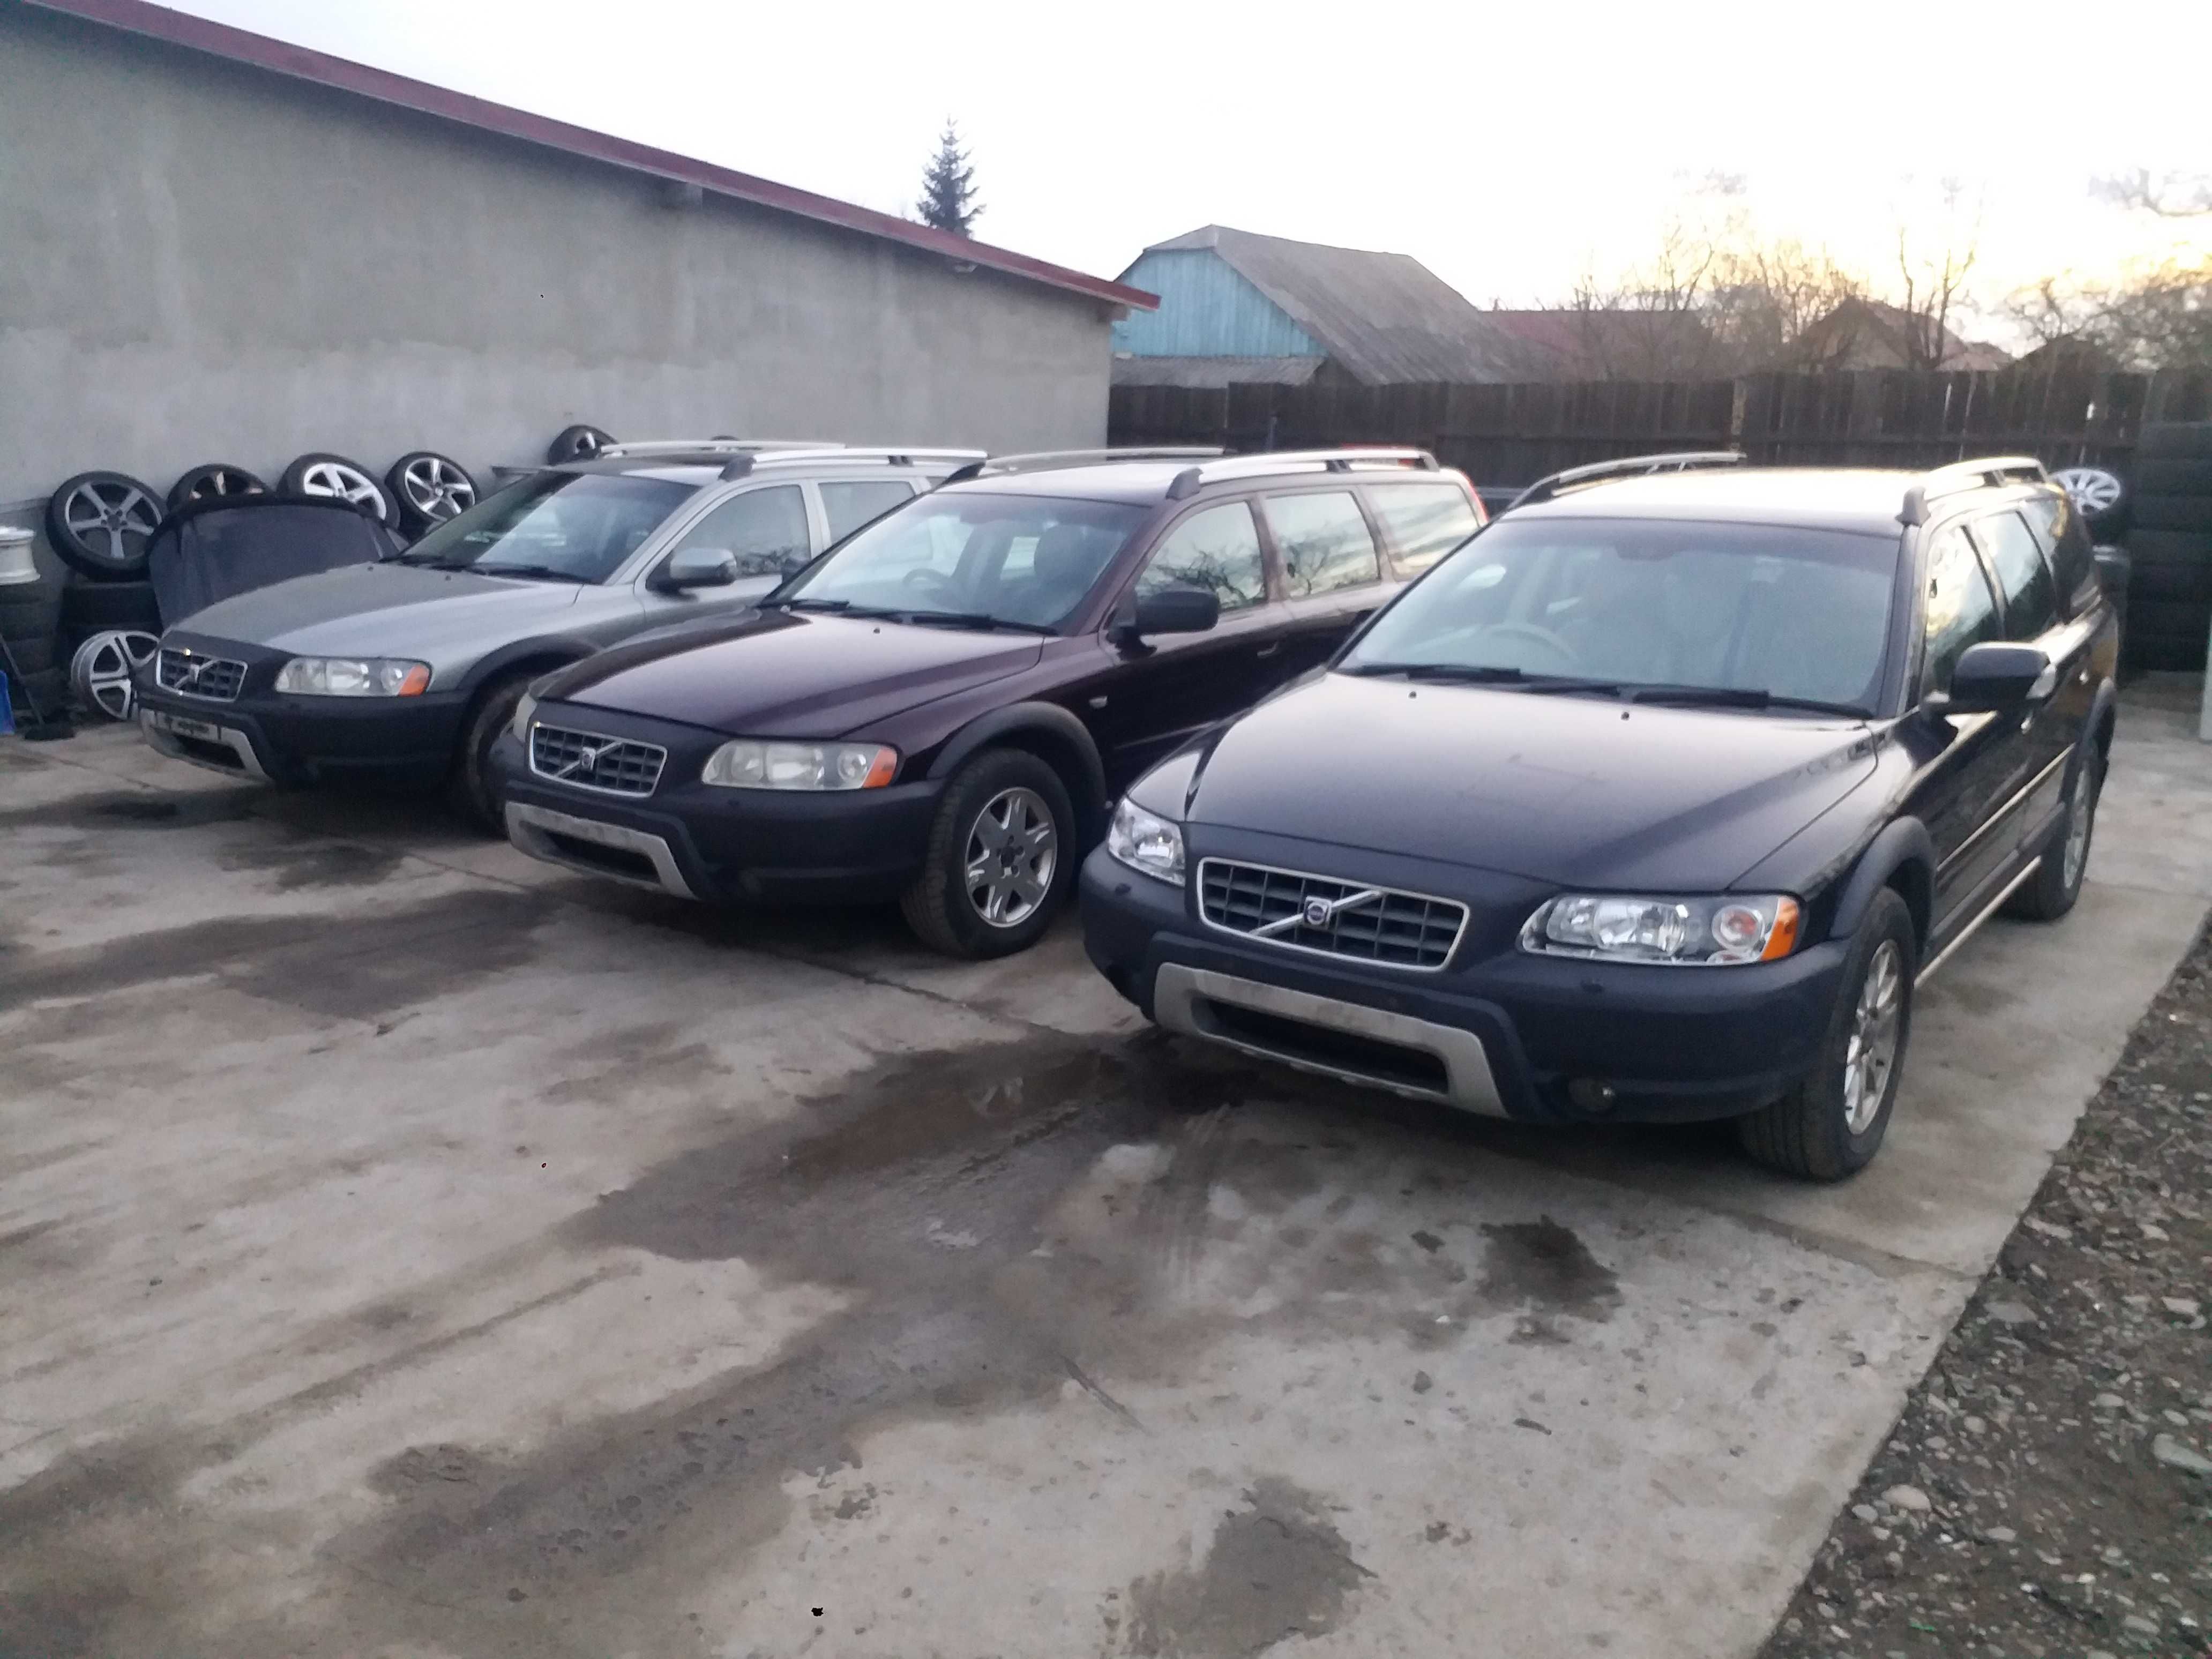 Piese Second Hand Volvo Xc70 Model 2000-2015